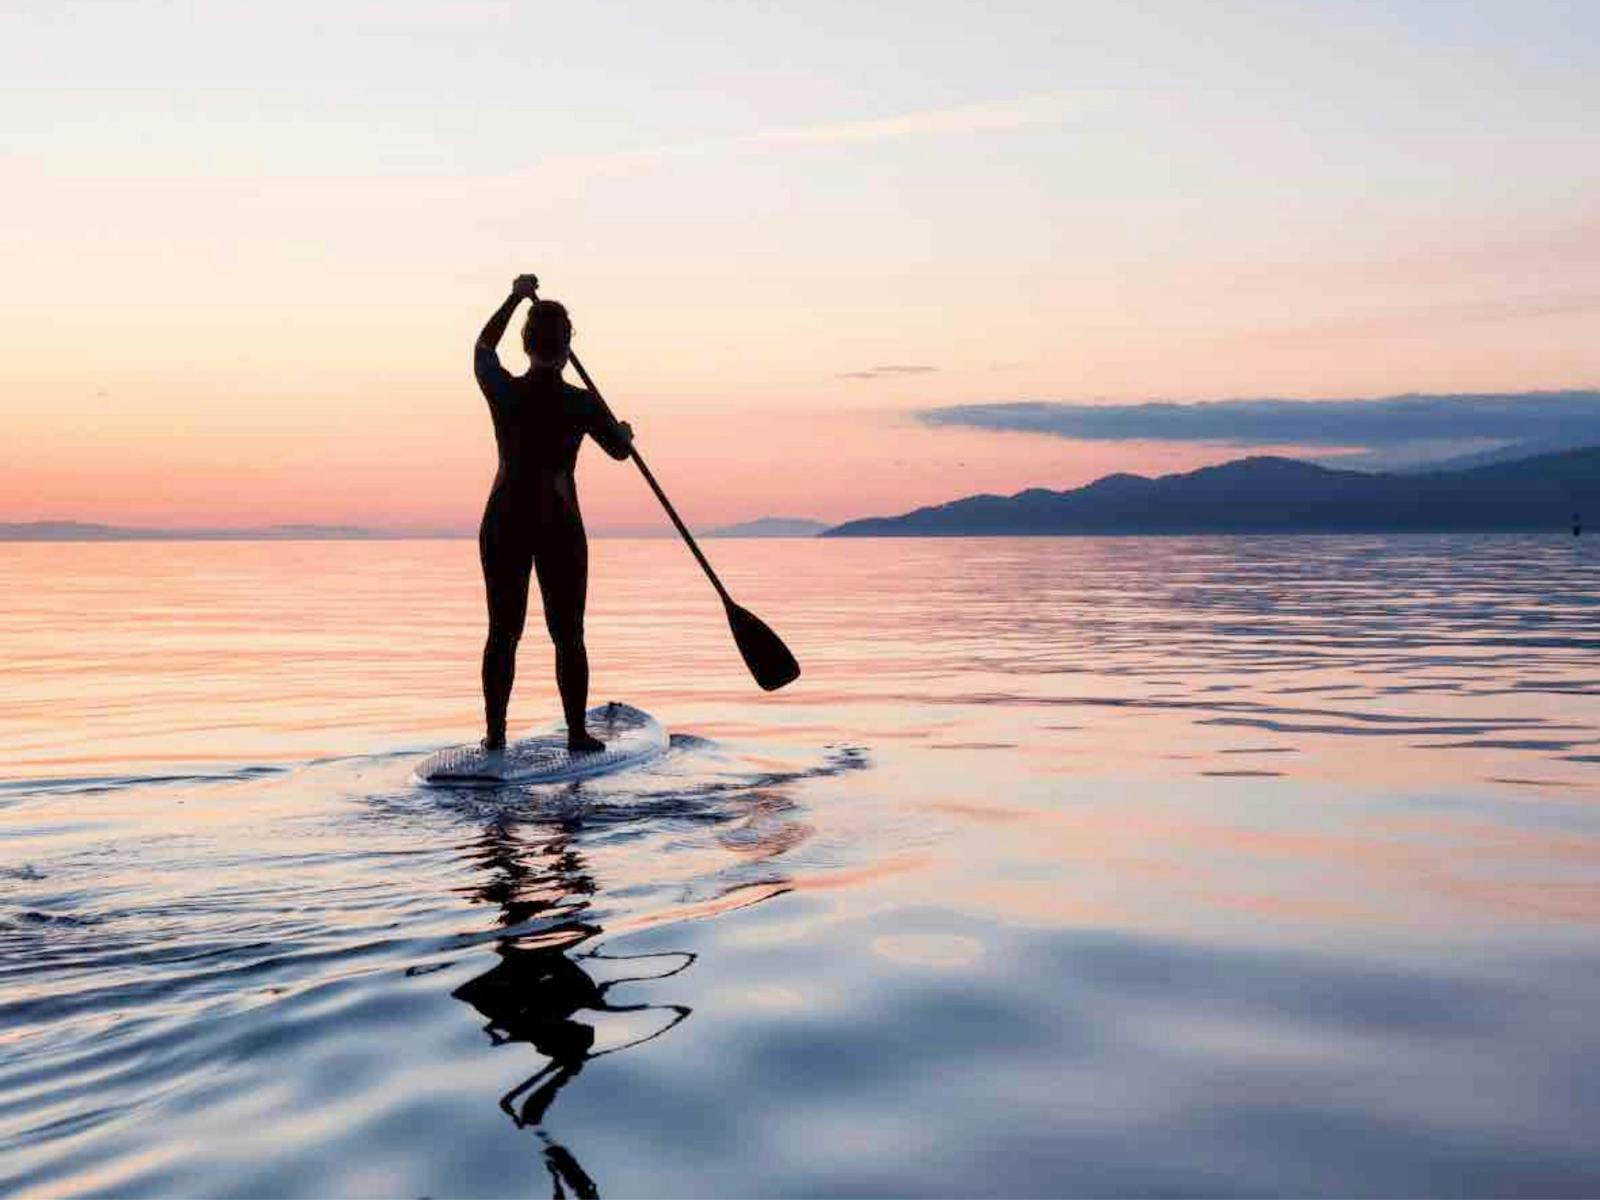 Stand-up paddleboard hire, perfect for the protected bays and estuaries of Culburra Beach.